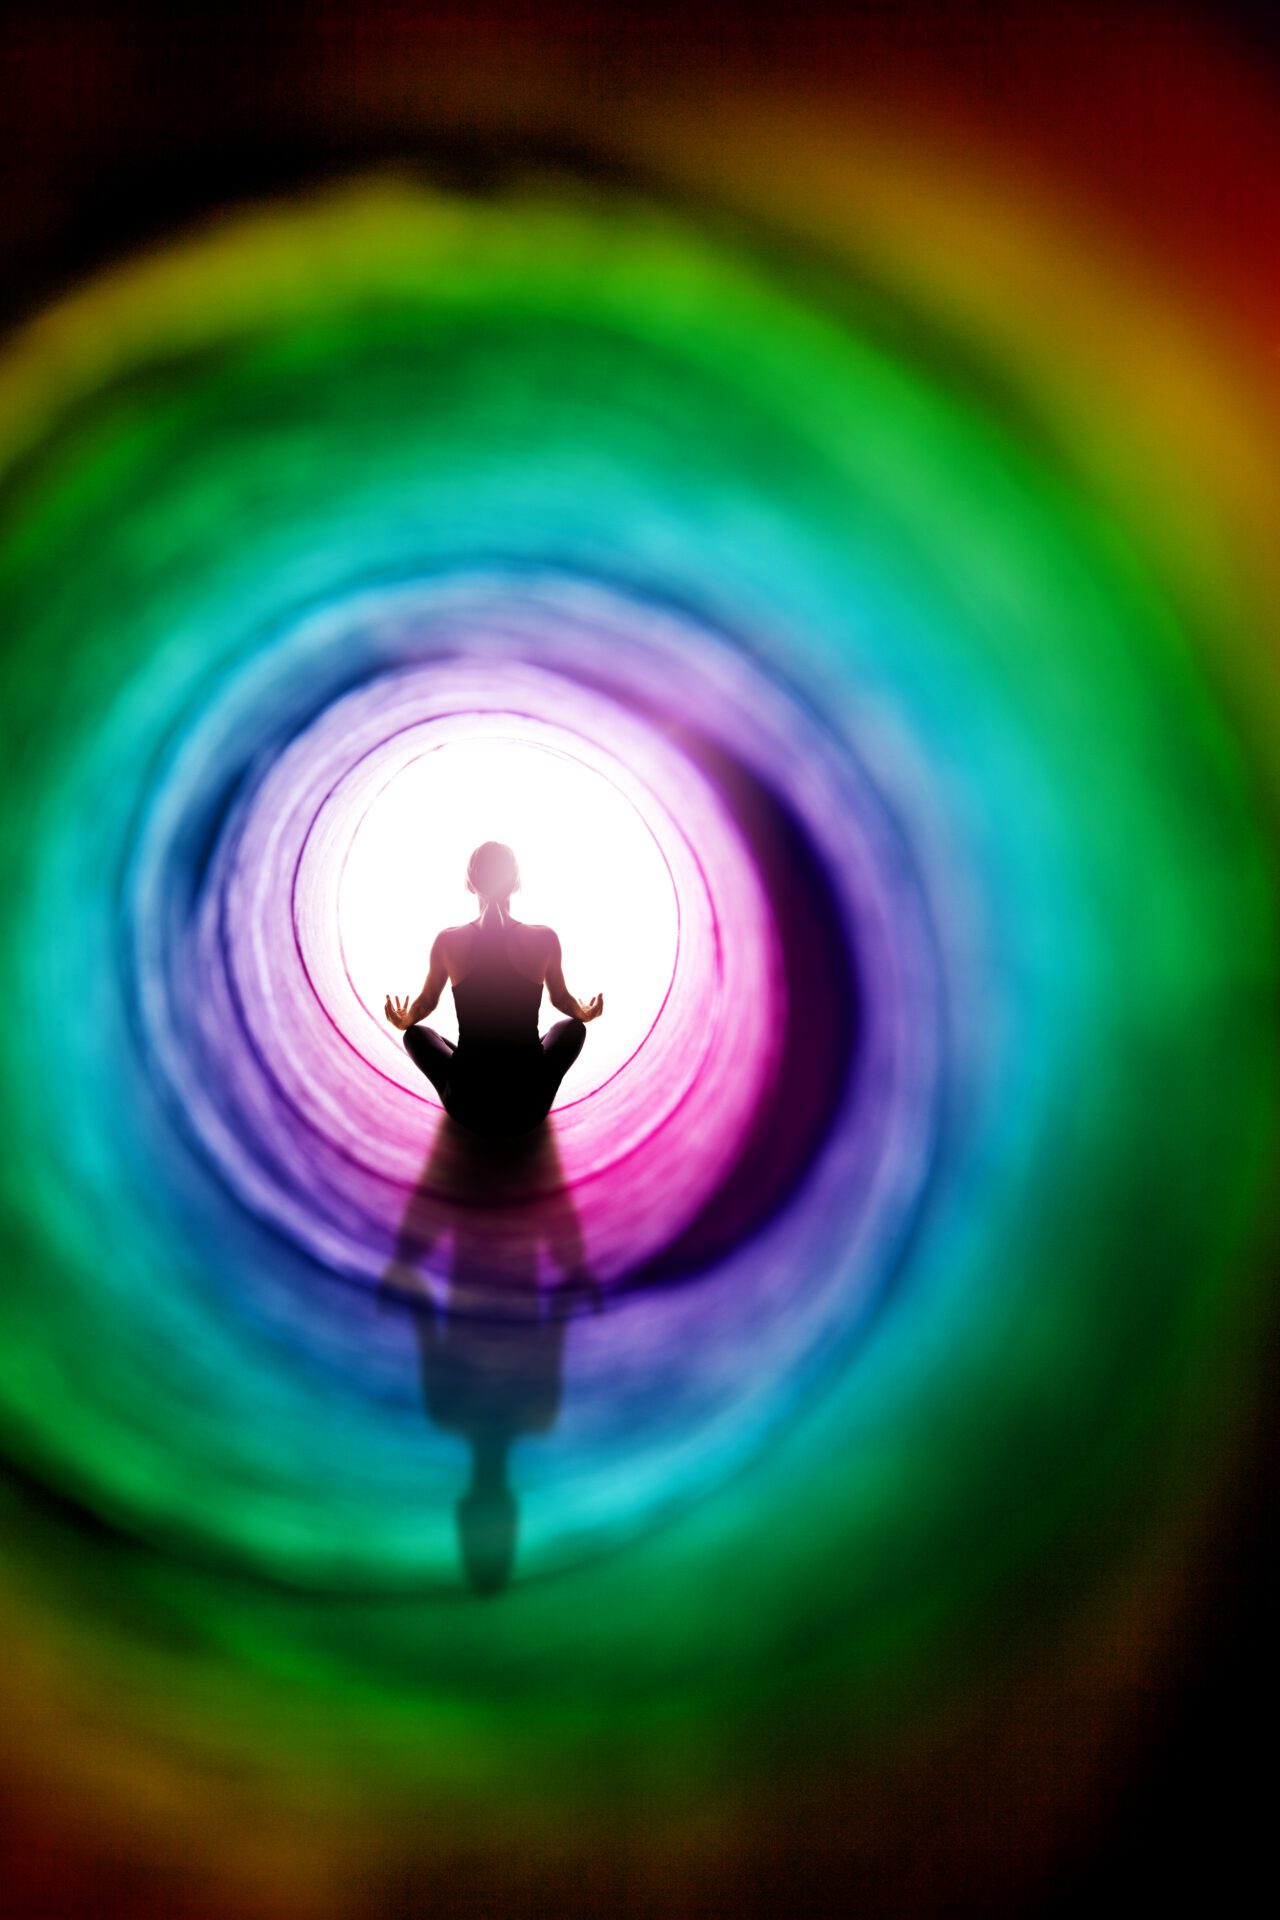 A conceptual image of the figure of a woman meditating by a colorful tunnel of light.